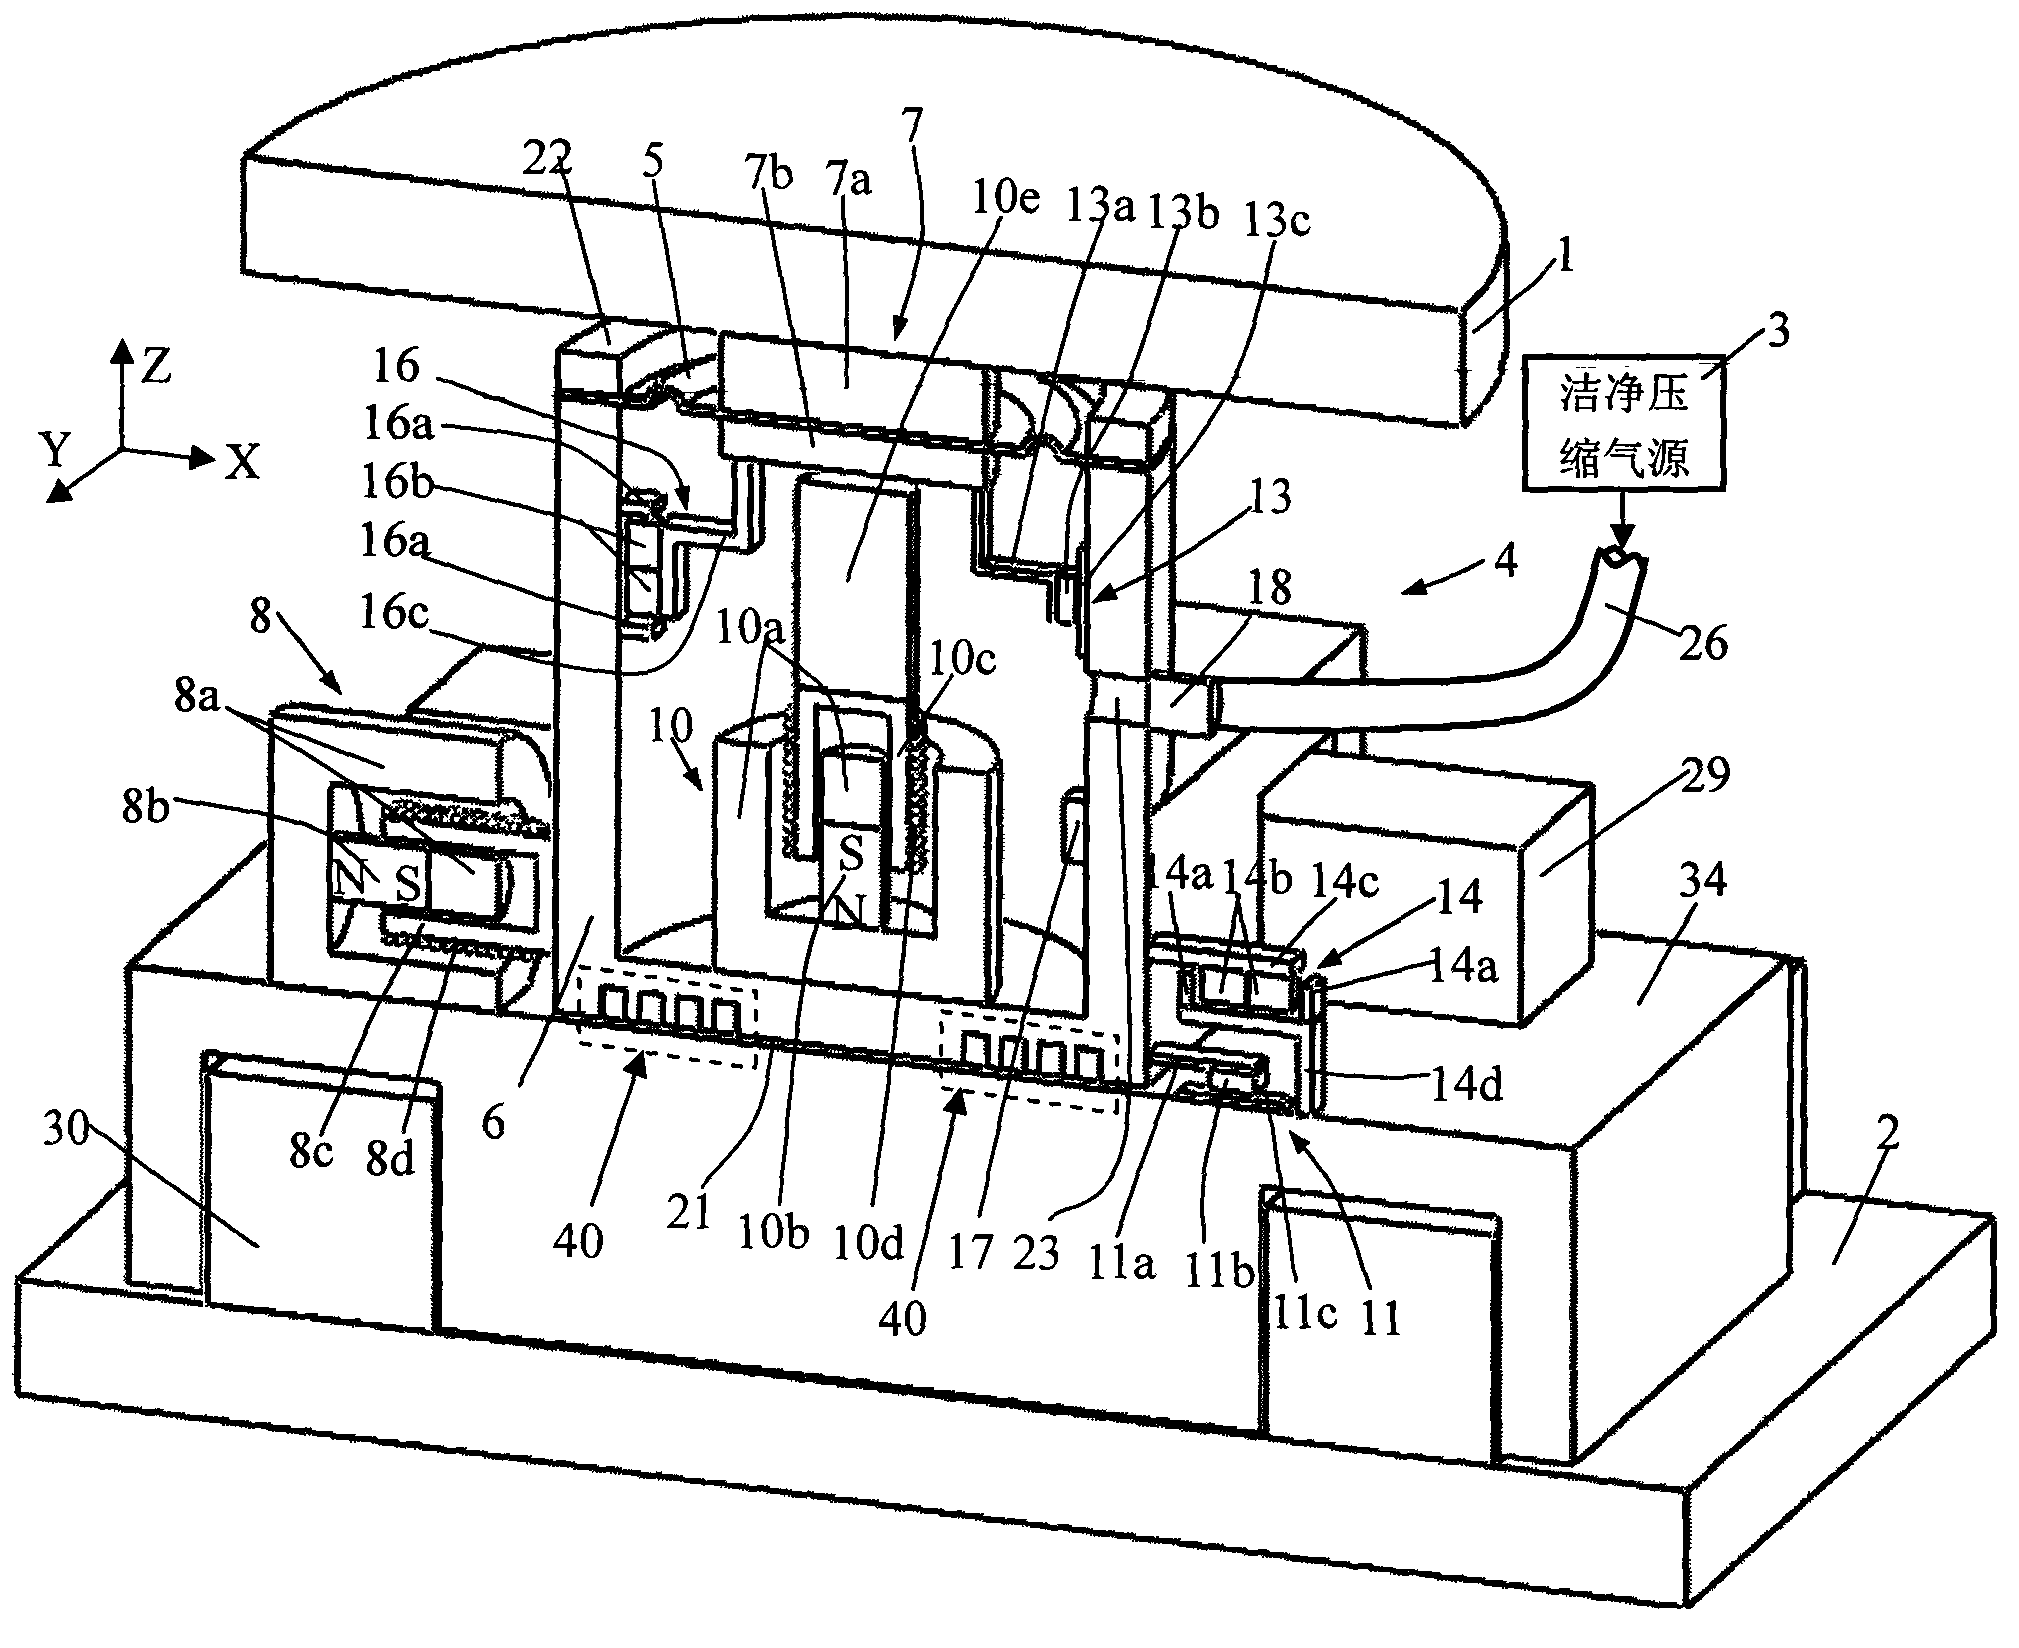 Eddy current damping vibration isolator of double-layer air-flotation orthogonal decoupling and flexible film angle decoupling